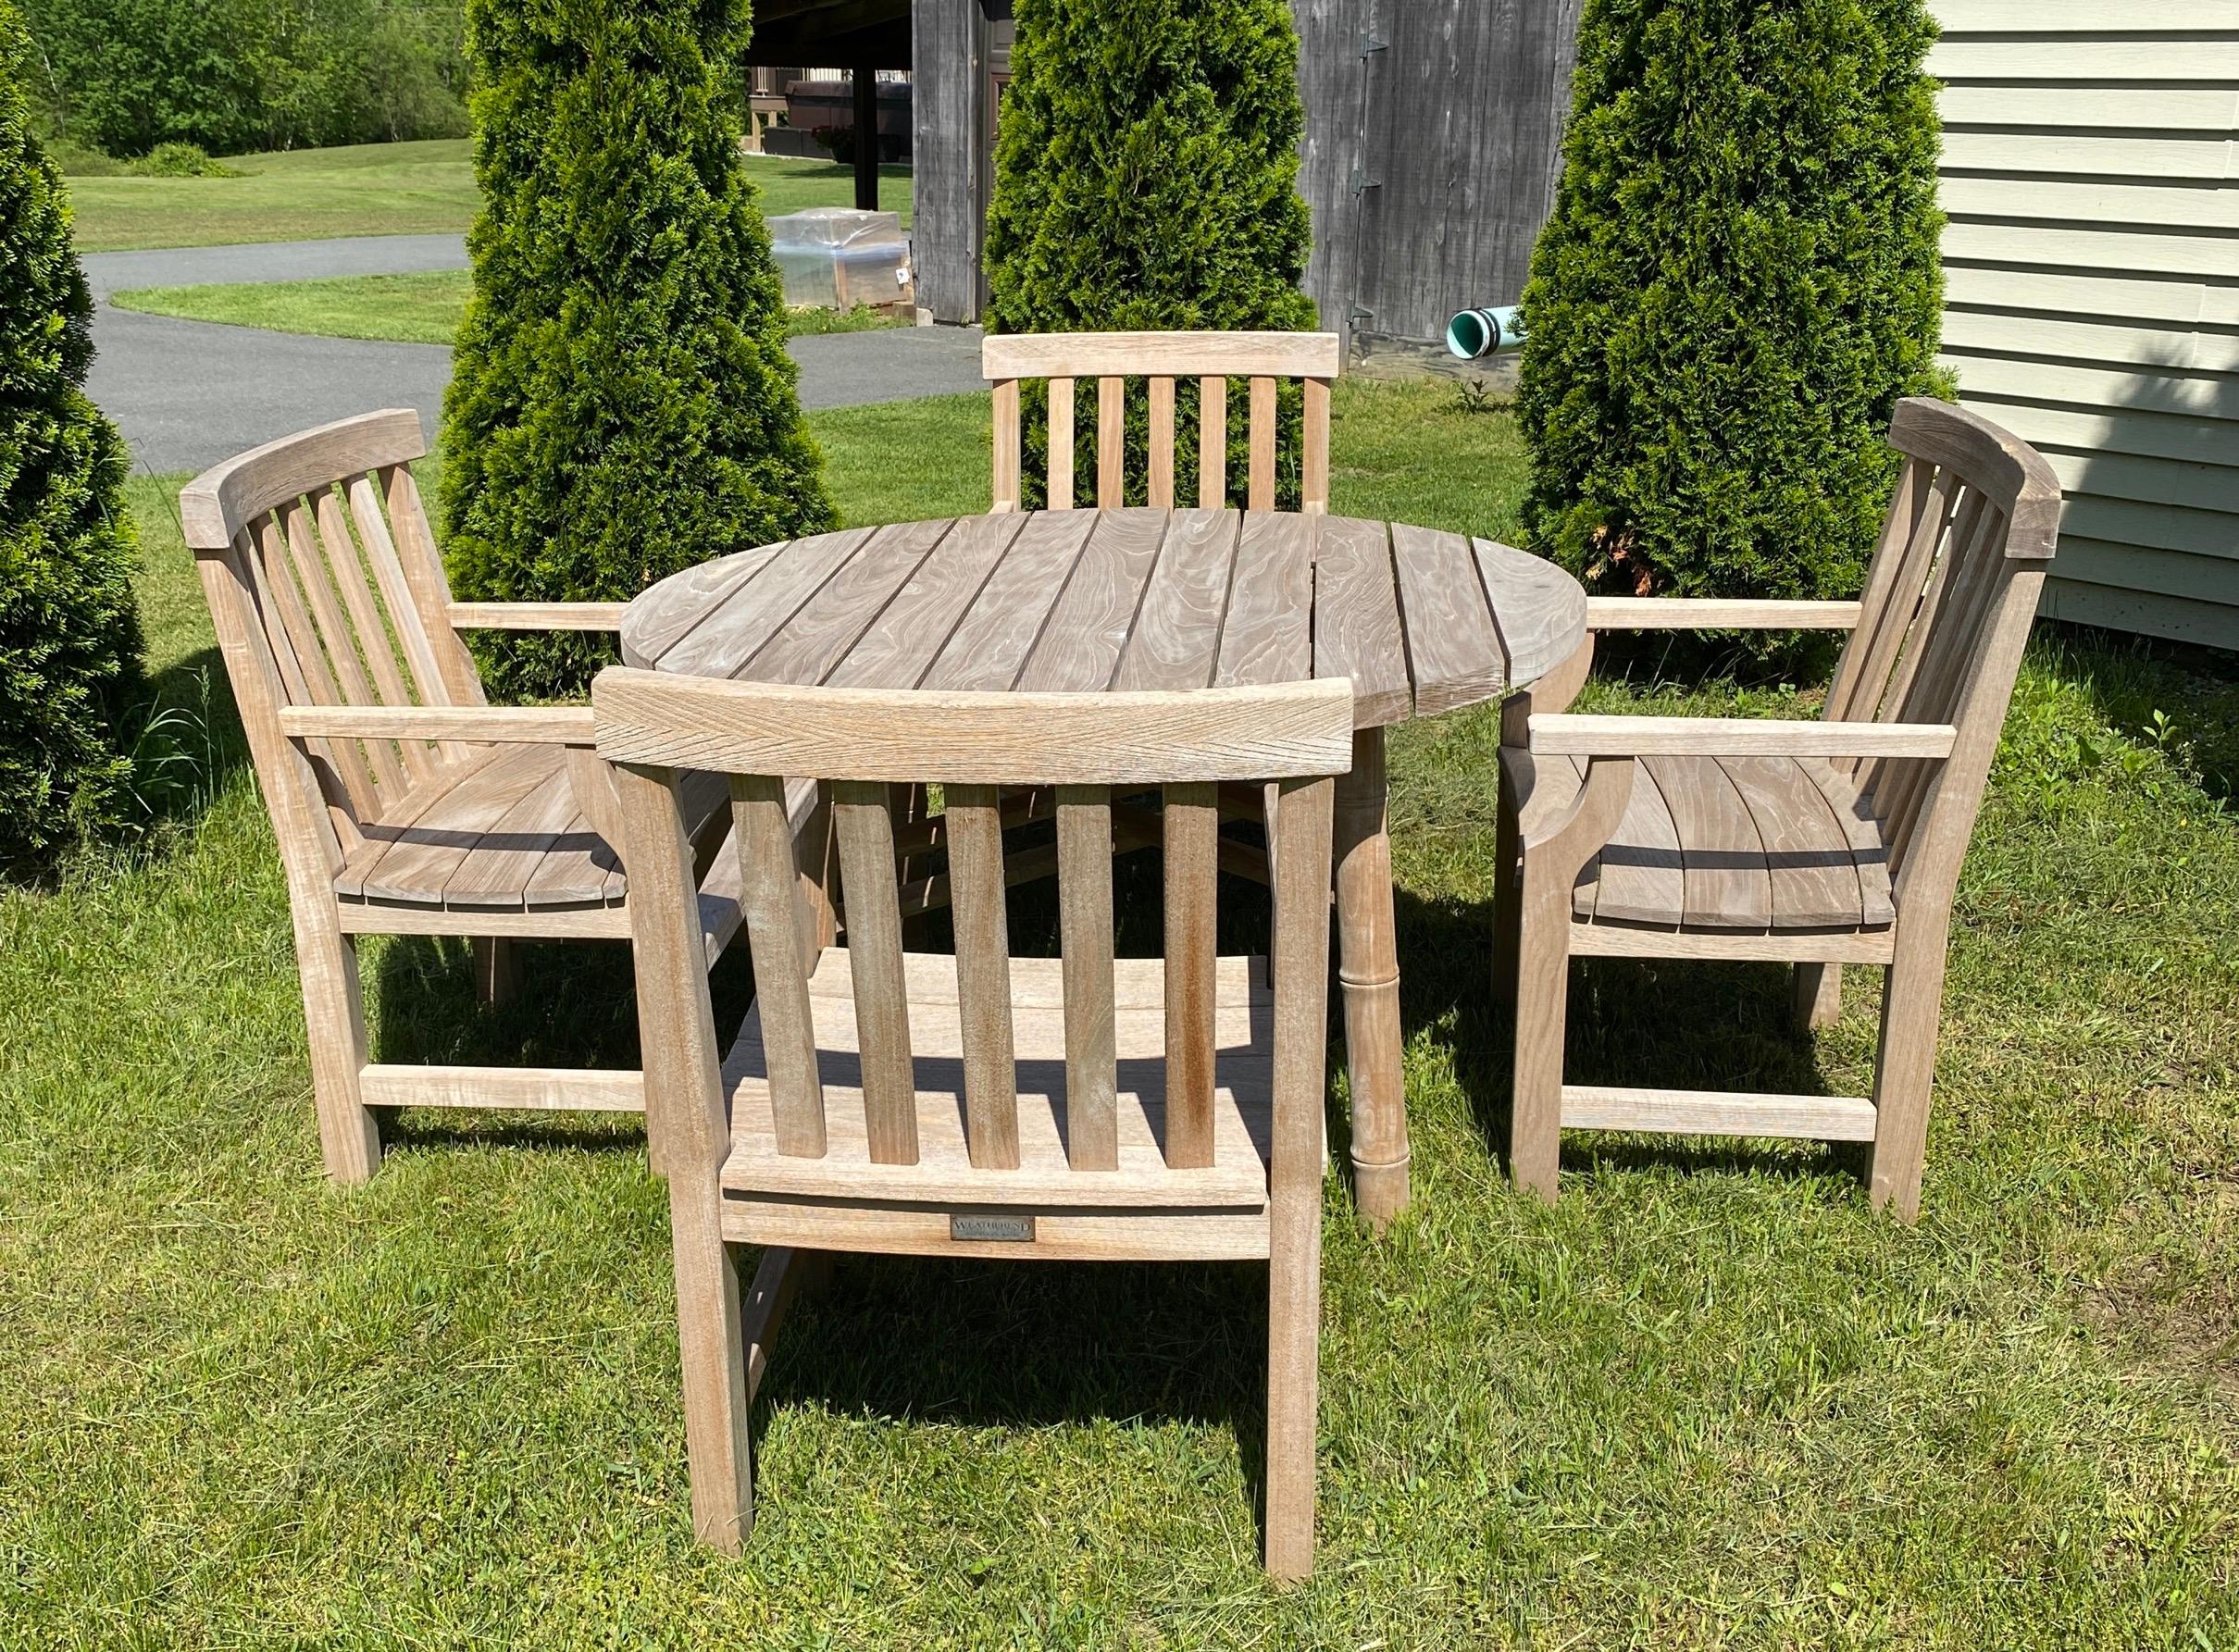 Vintage outdoor teak garden, porch or patio dining table with 4 armchairs. Table is made by McGuire having stylish faux bamboo legs, chairs with generous proportions for extra comfortable seating and dining. Table and chairs have recently been